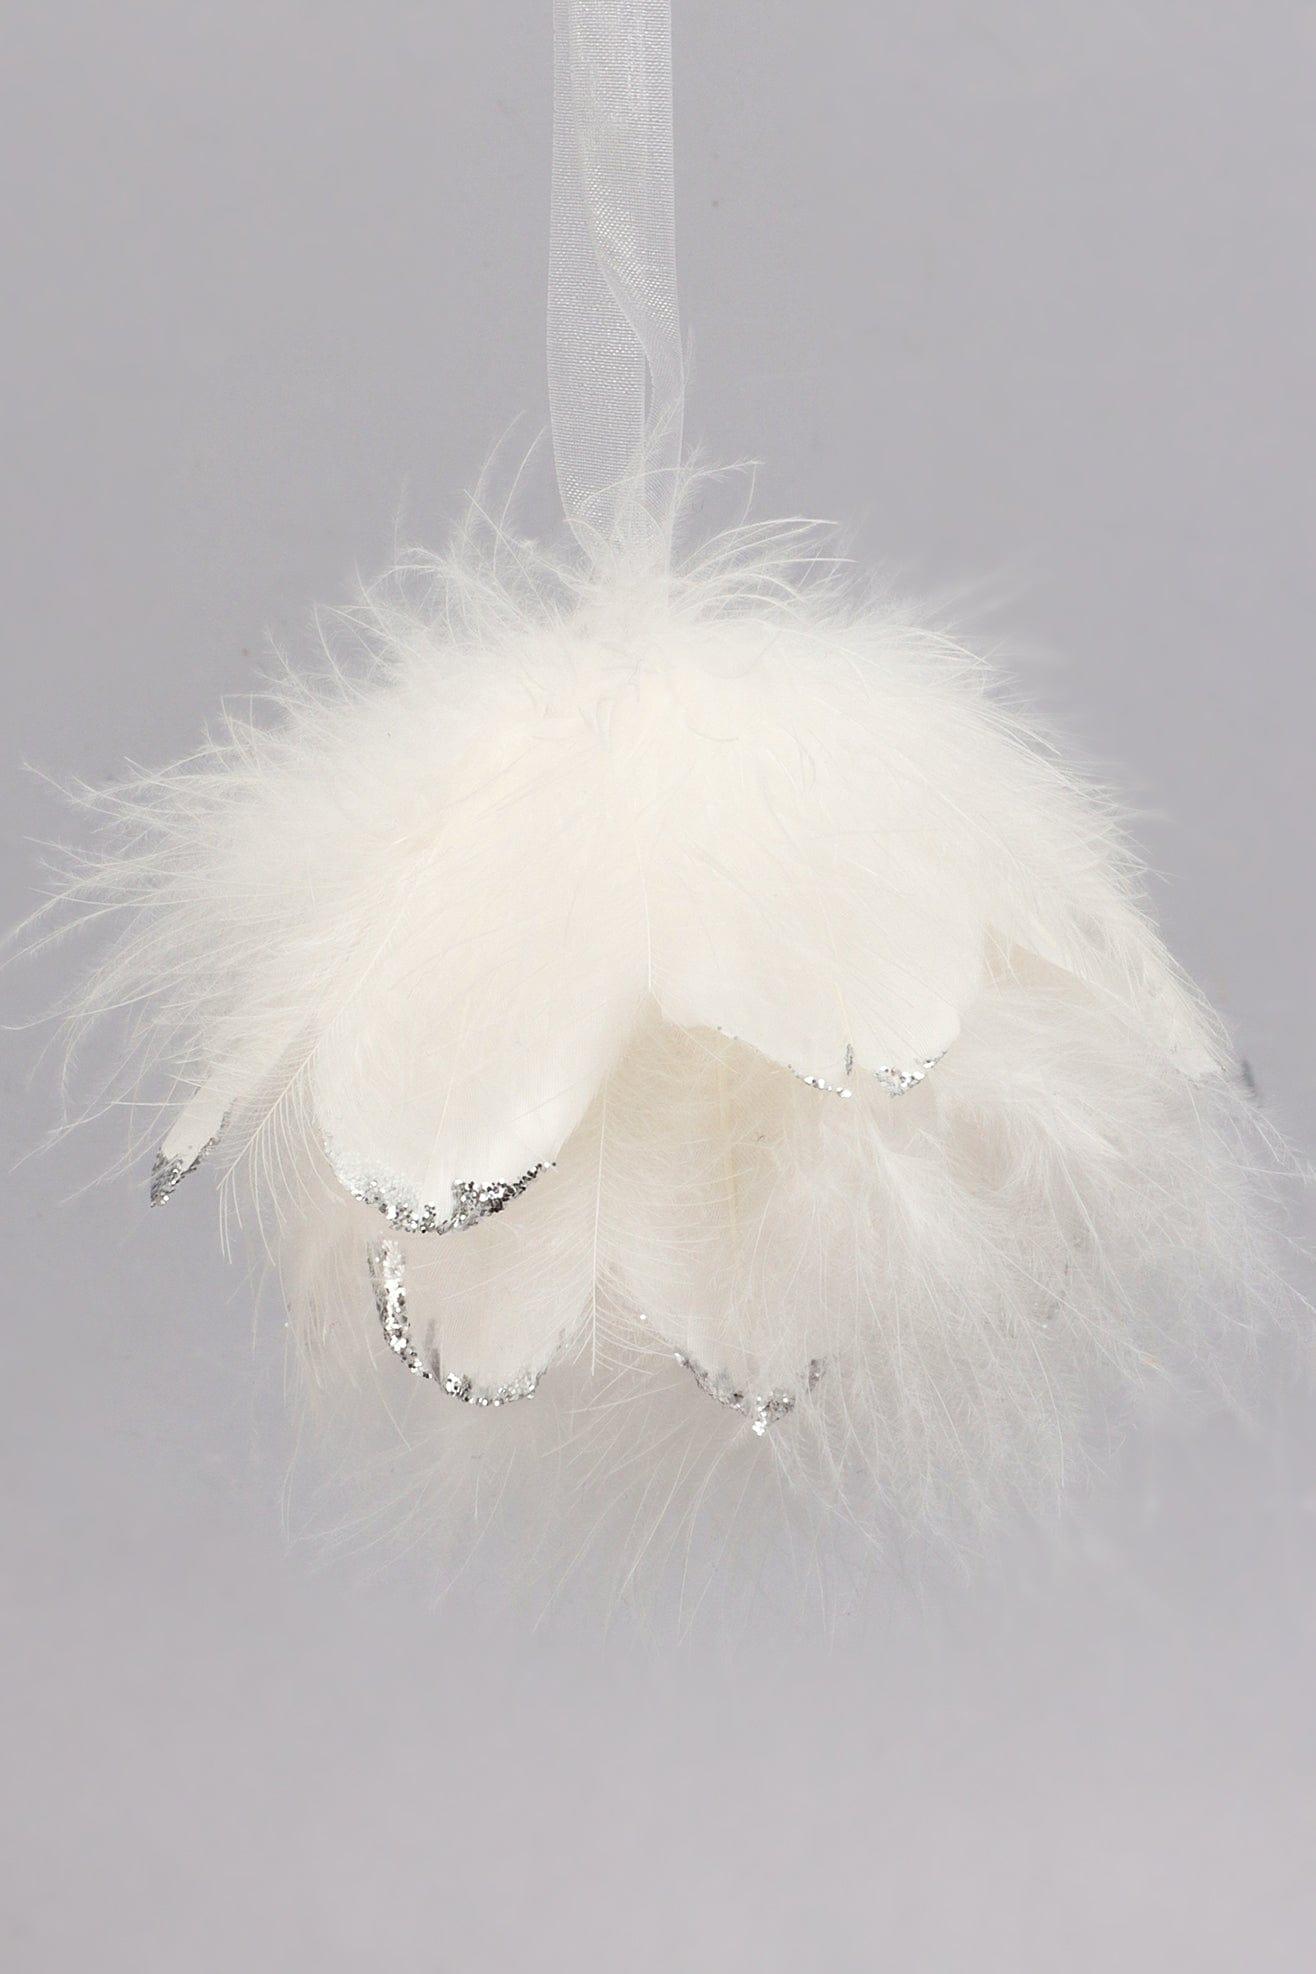 G Decor Christmas Decorations White / Small Fluffy Feathery Christmas Tree Bauble